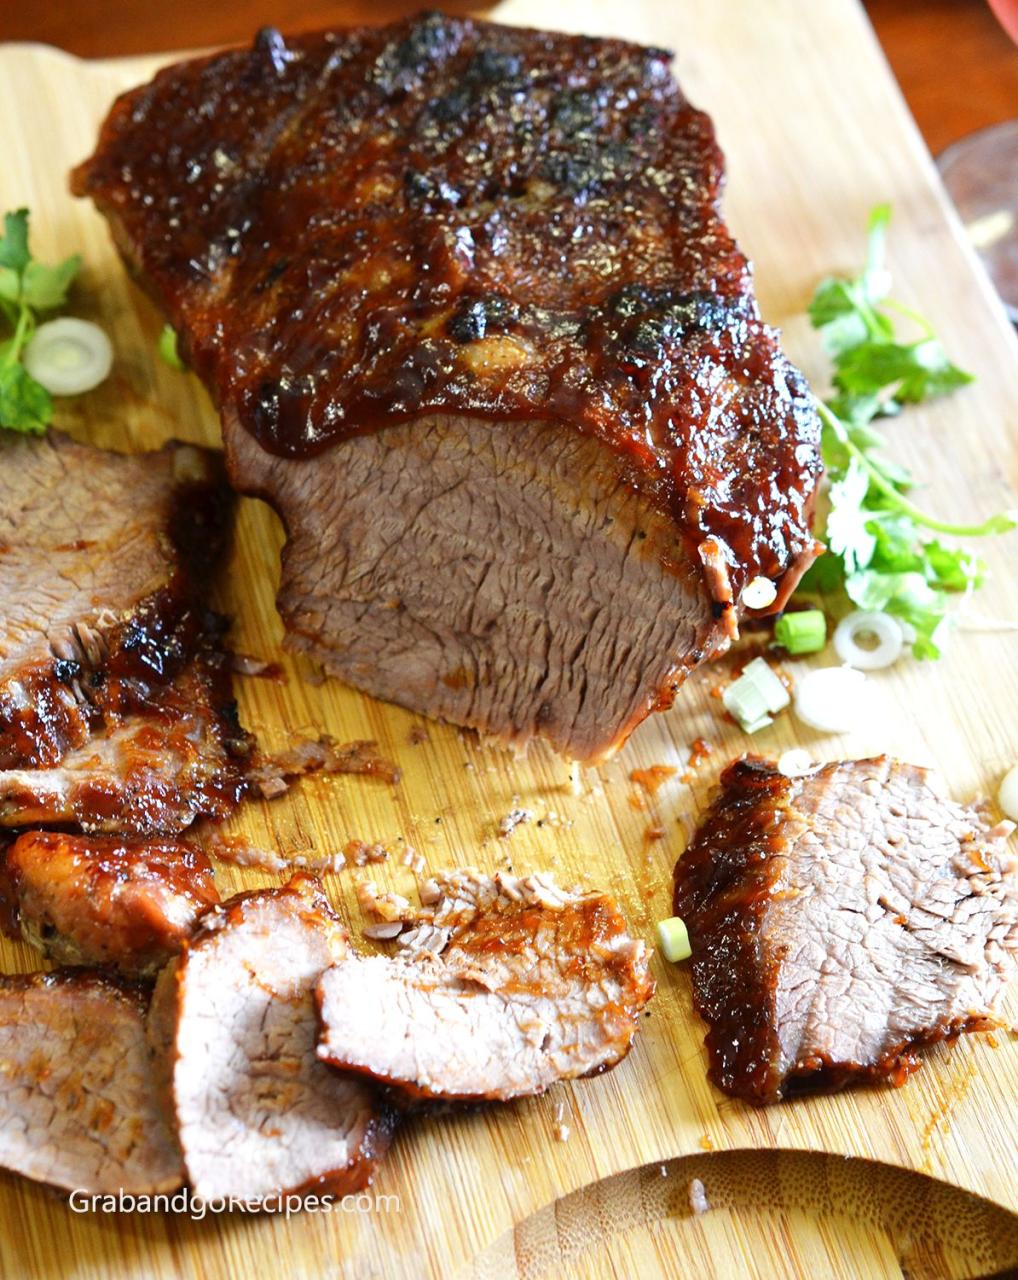 How To Cook A Tri-tip On A Traeger Barbecue